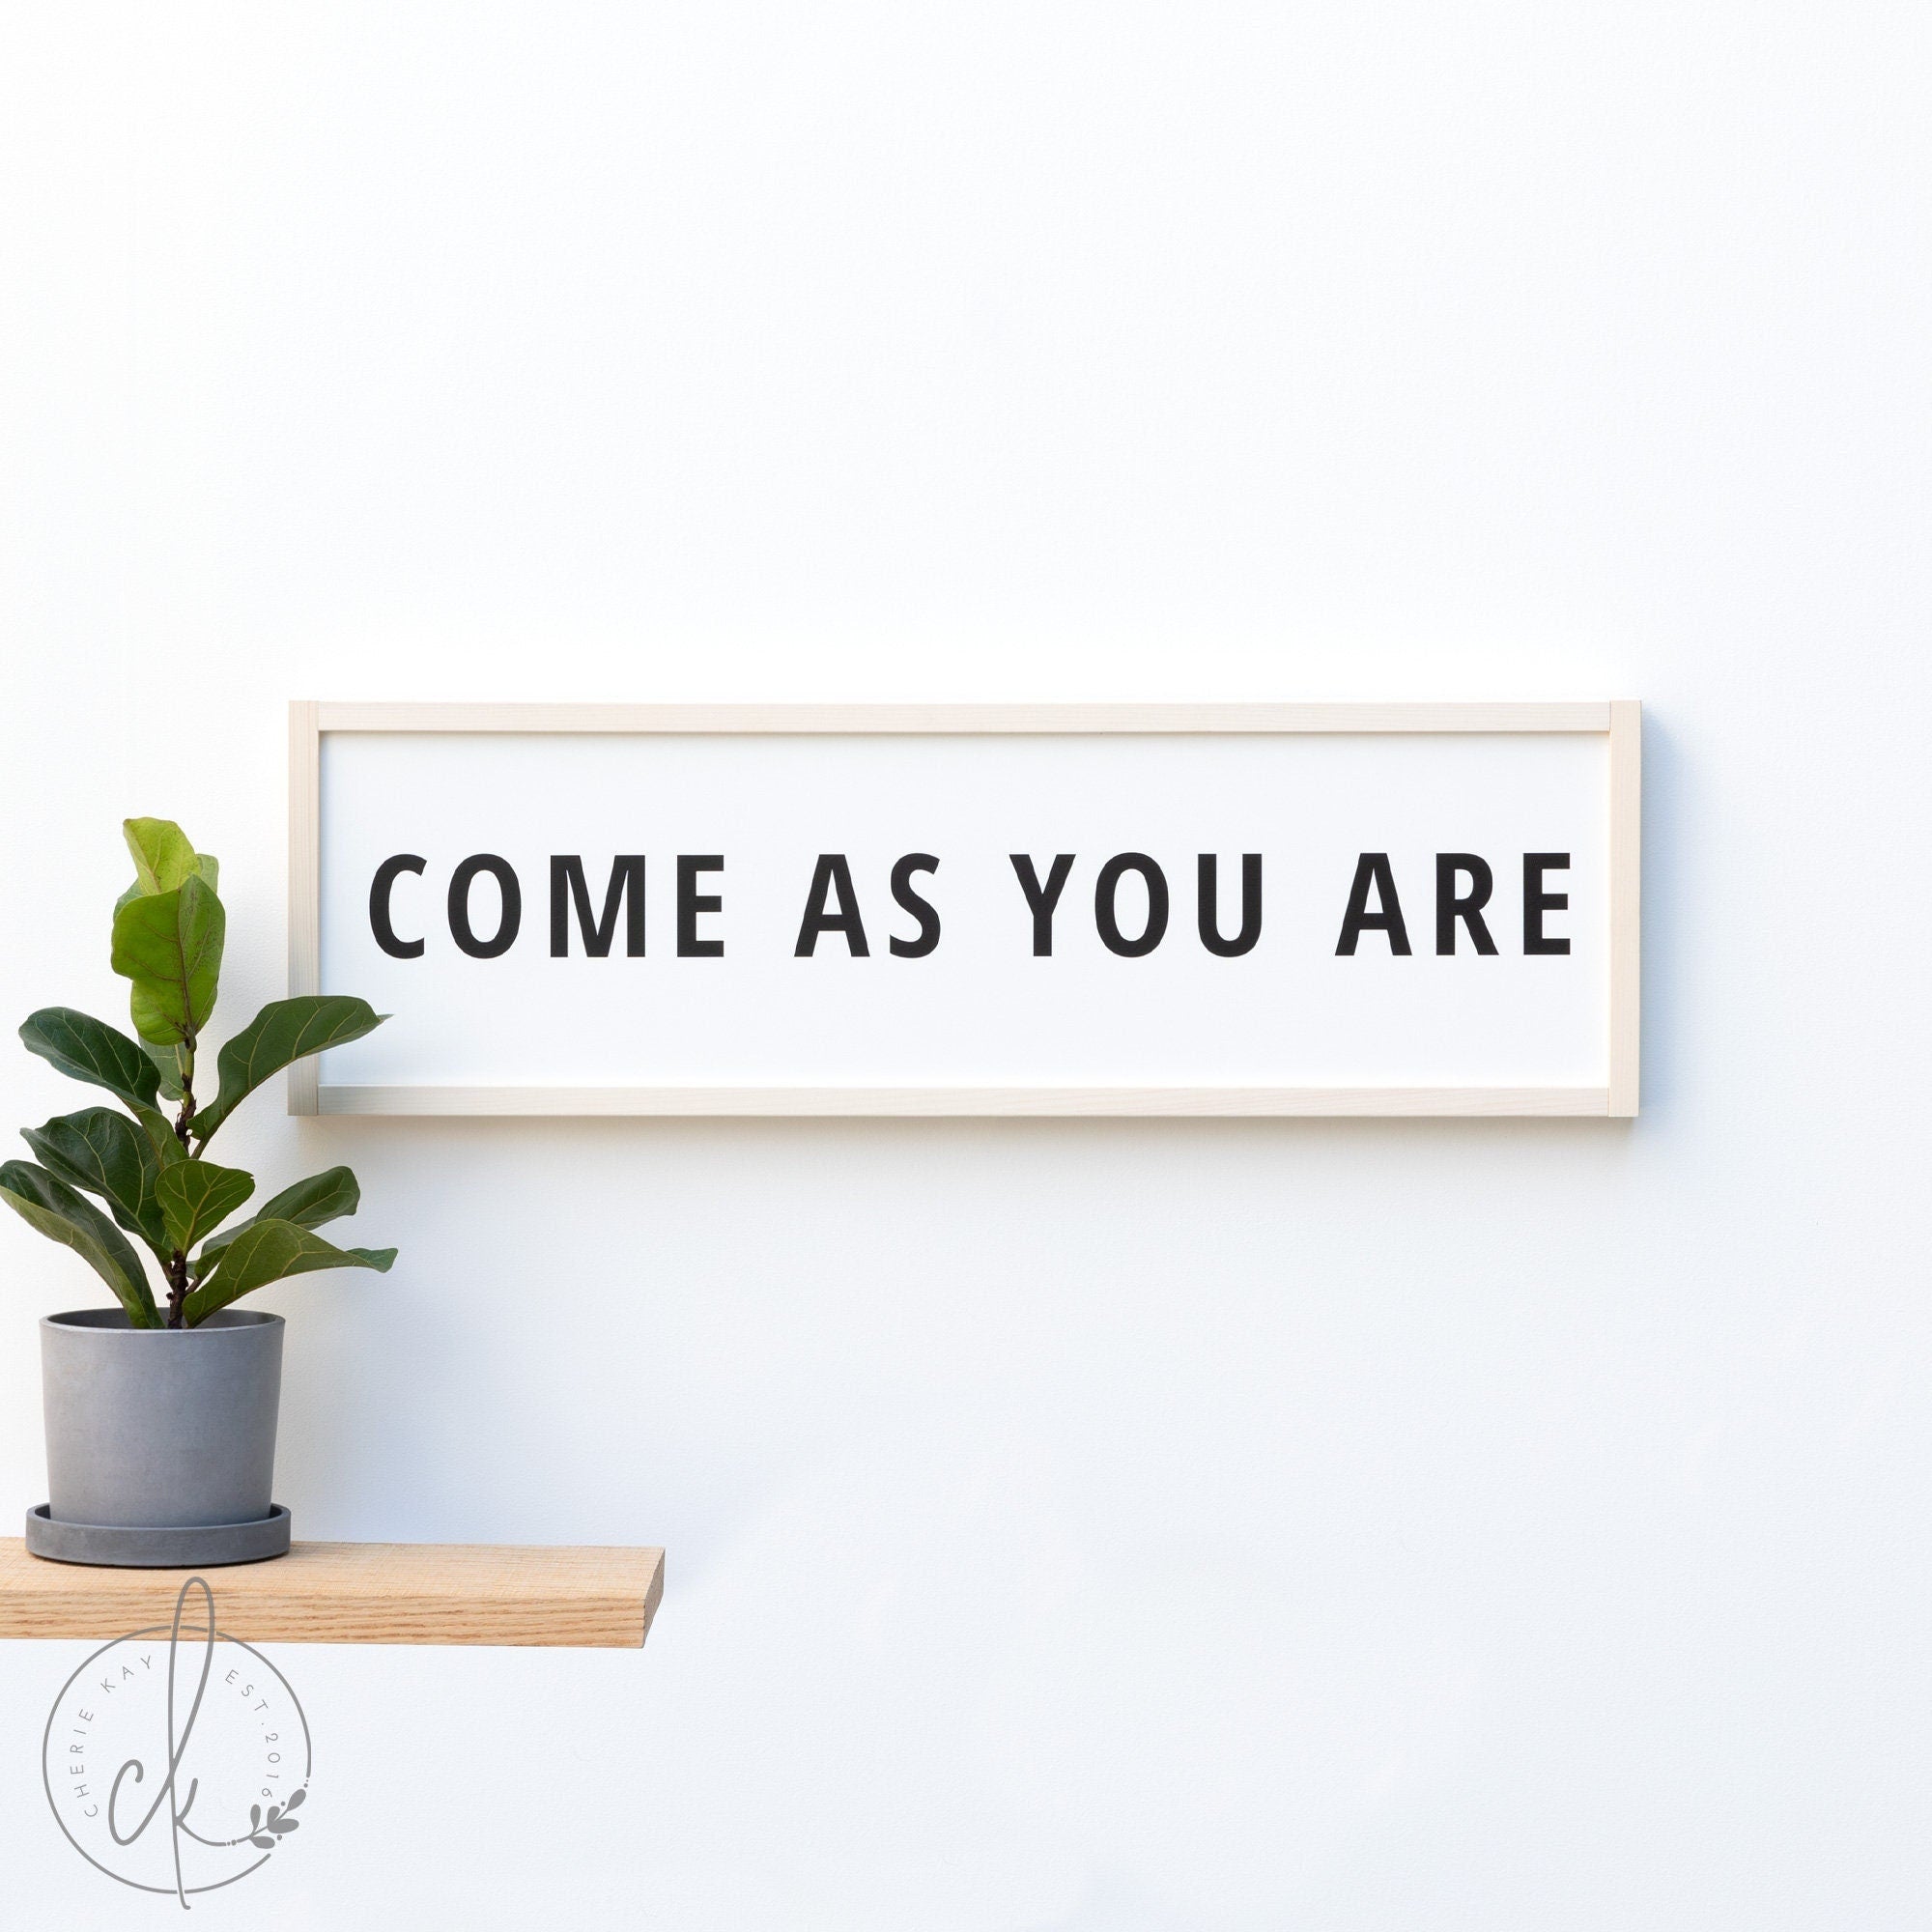 Come As You Are | Wood Signs | Entryway Decor | Christian Wall Art | Minimalist Wall Art | Christian Home Decor